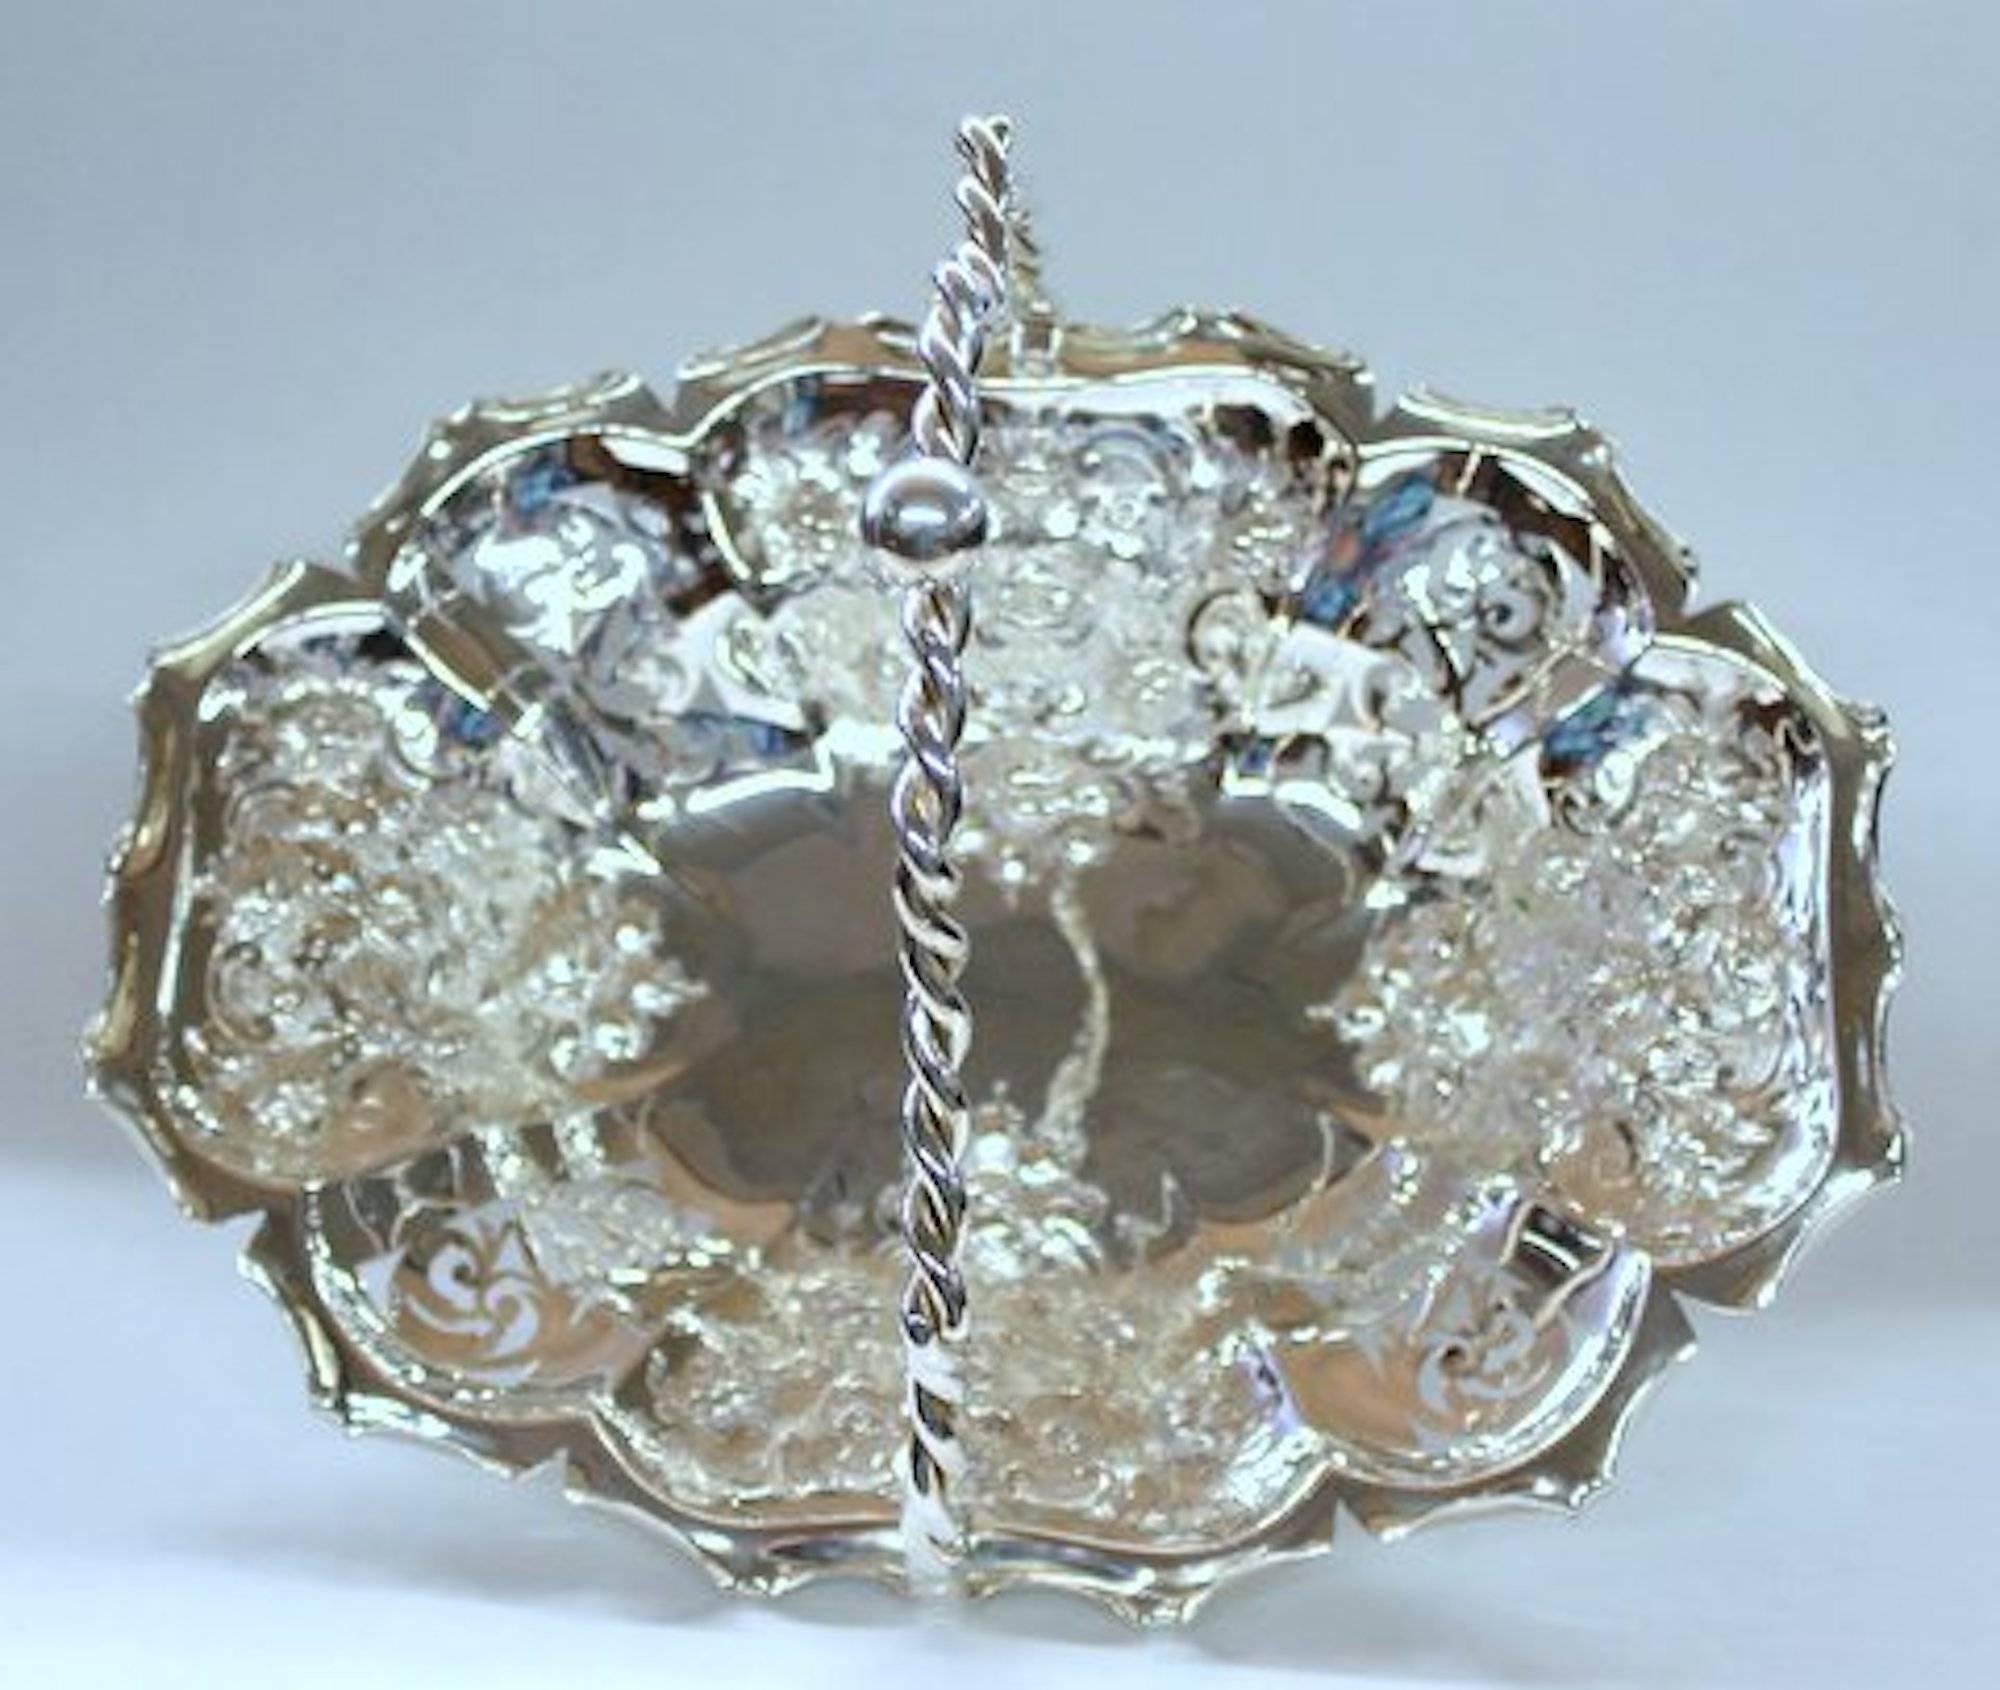 19th Century English Silver Plated, Pierced Oblong Cake or Bread Basket 2